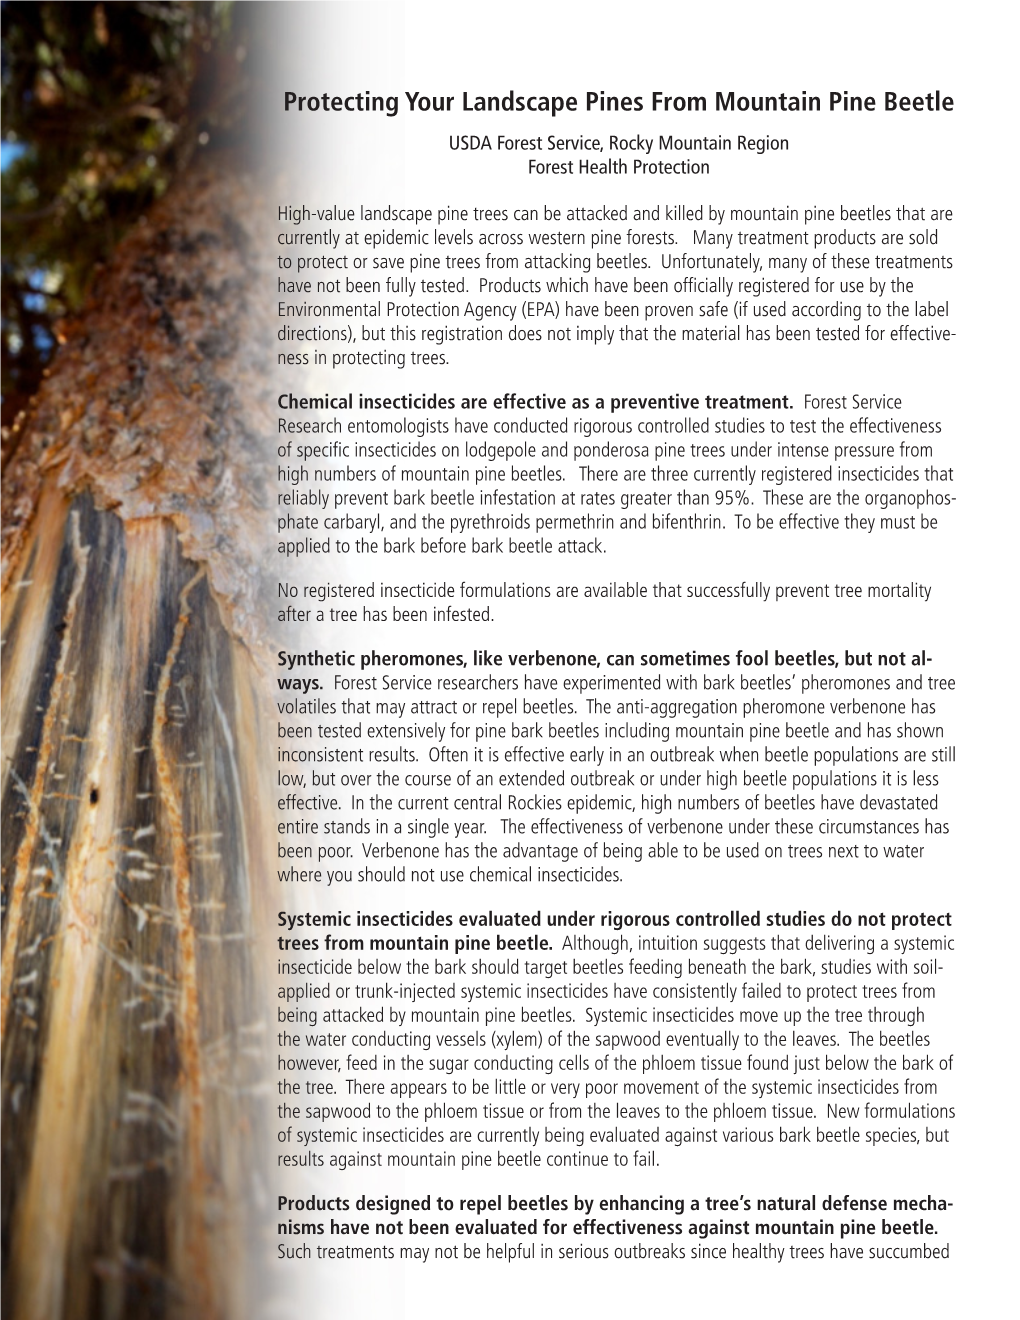 Protecting Your Landscape Pines from Mountain Pine Beetle USDA Forest Service, Rocky Mountain Region Forest Health Protection